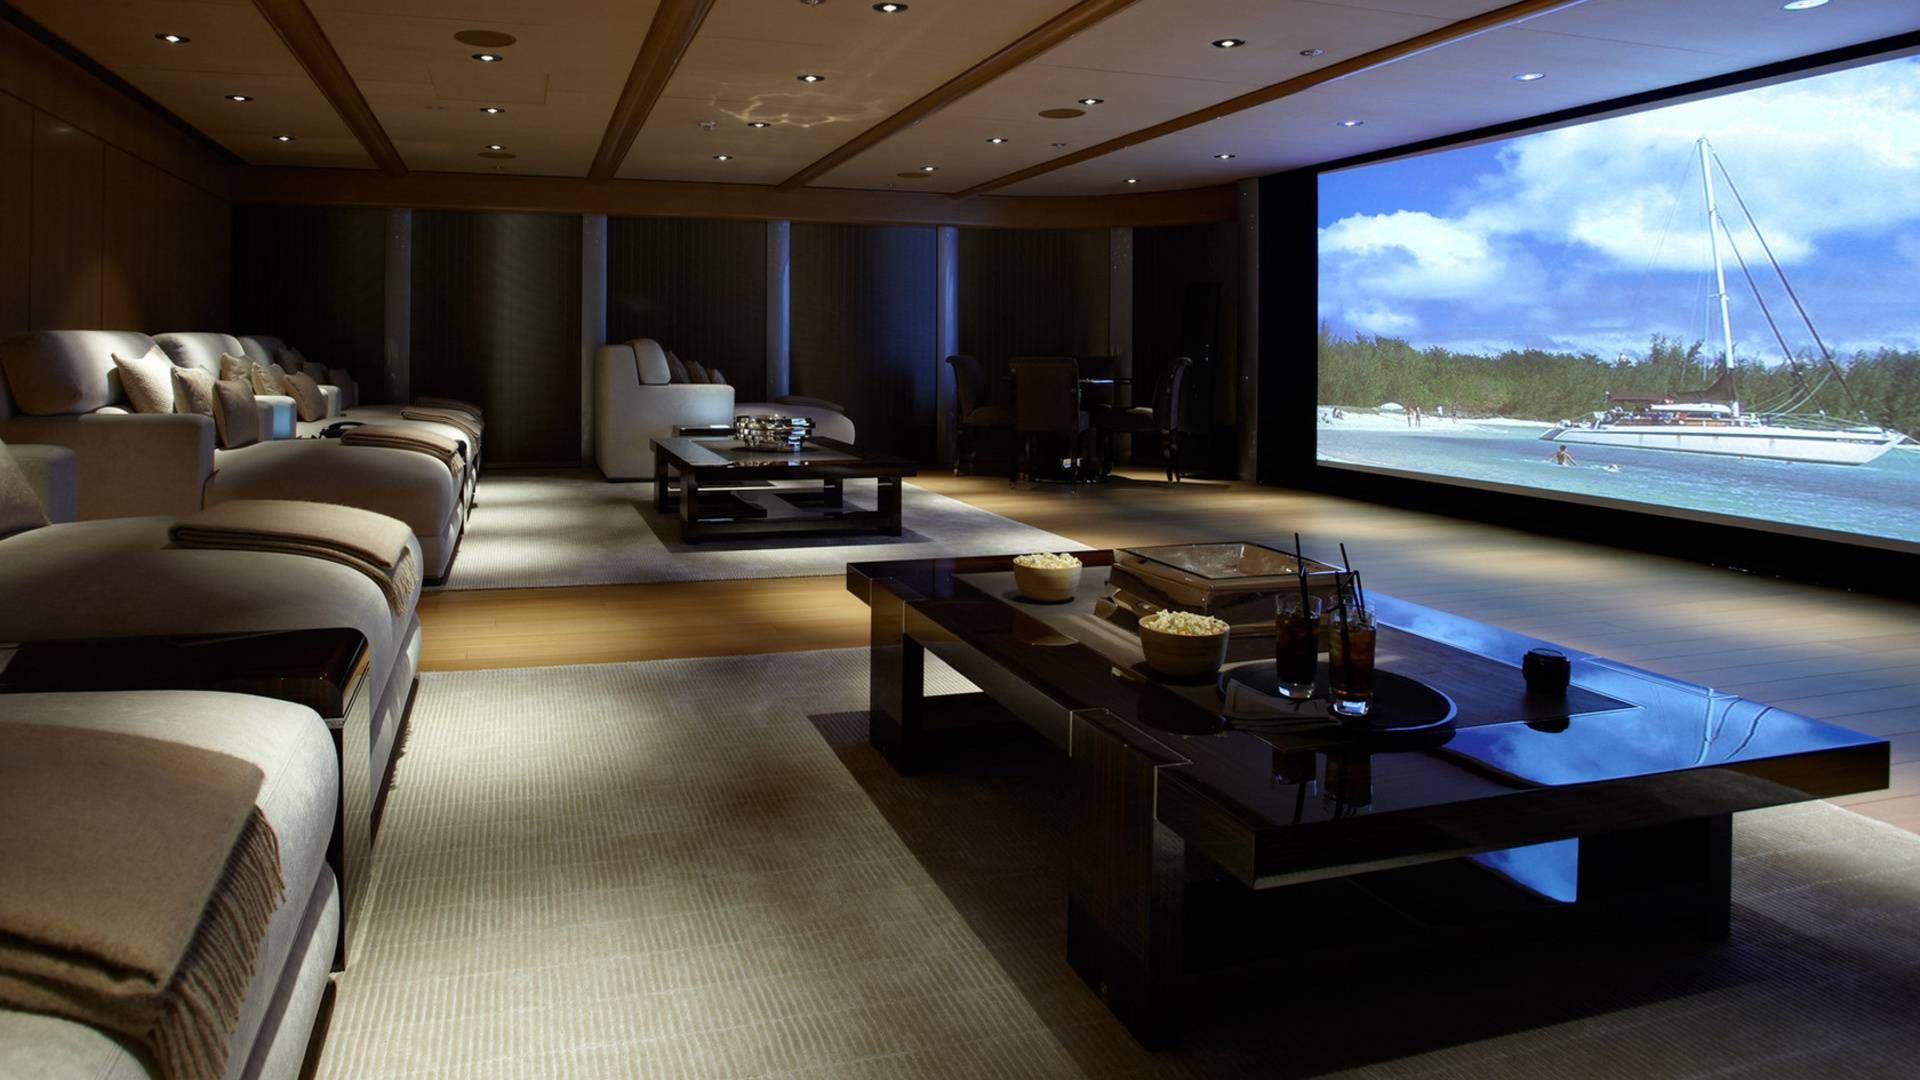 Furniture & Sofa: Enjoy Your Holiday With Costco Home Theater Pertaining To Theater Room Sofas (Photo 12 of 30)